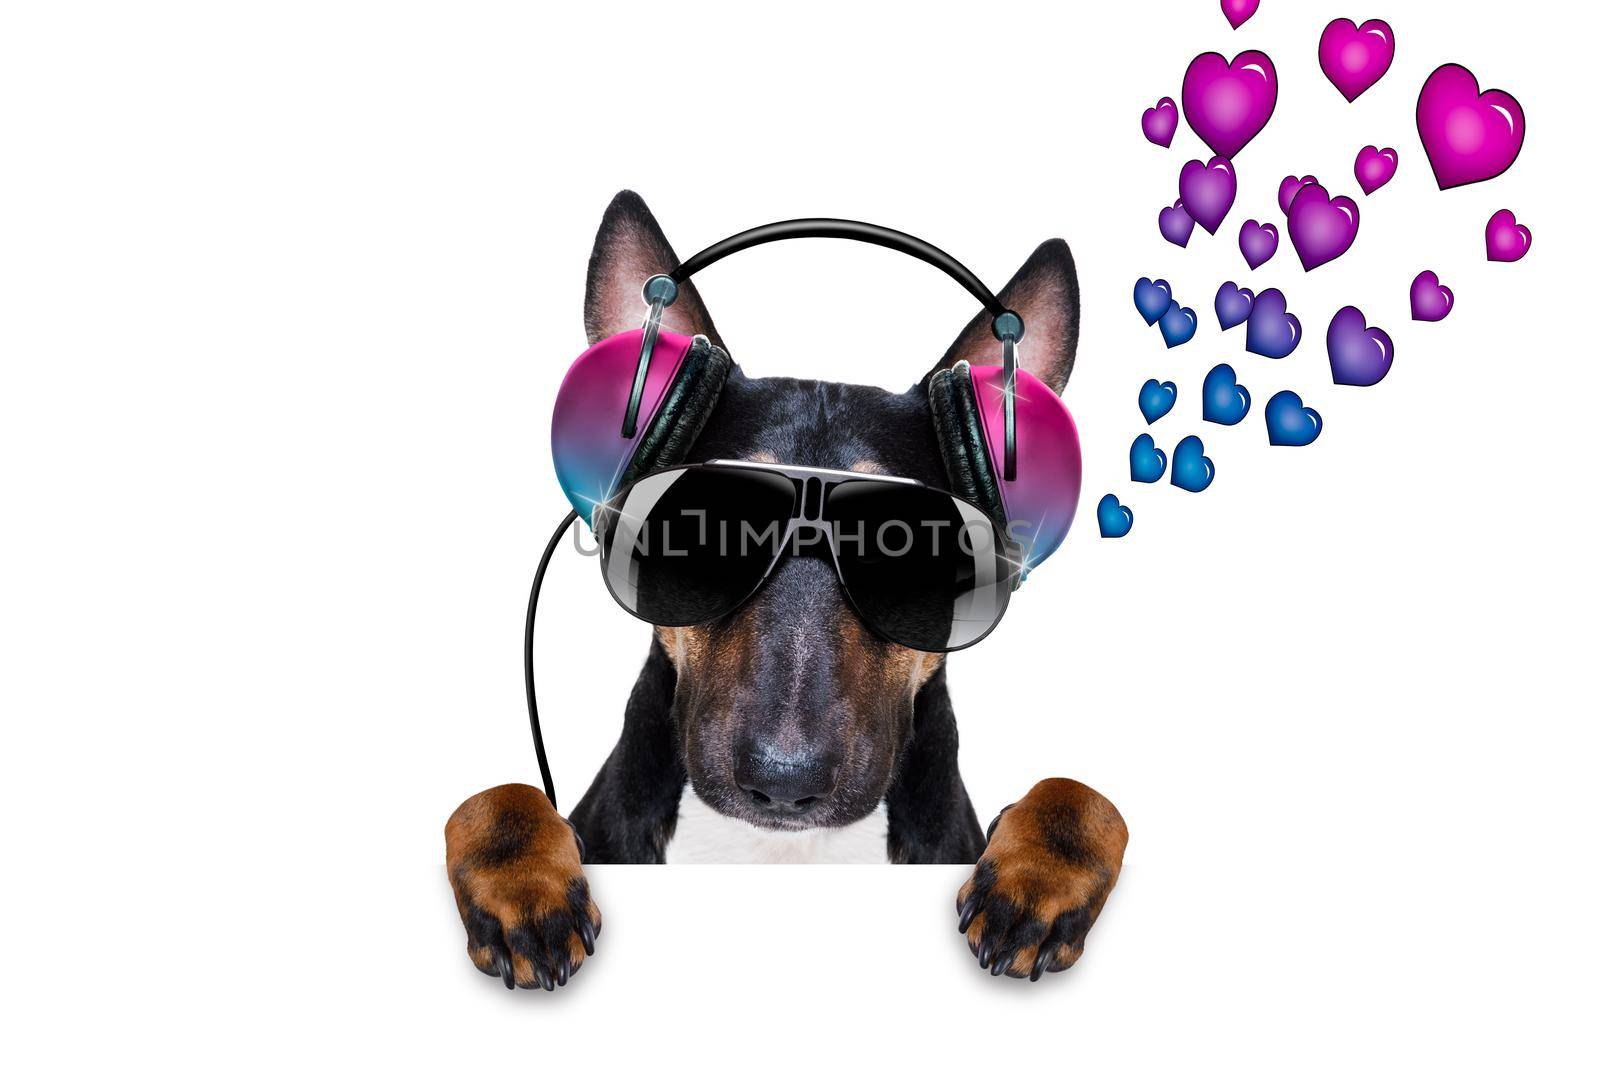 Dj bull terrier dog playing music in a club with disco ball , isolated on white background, with vinyl record behind banner or placard